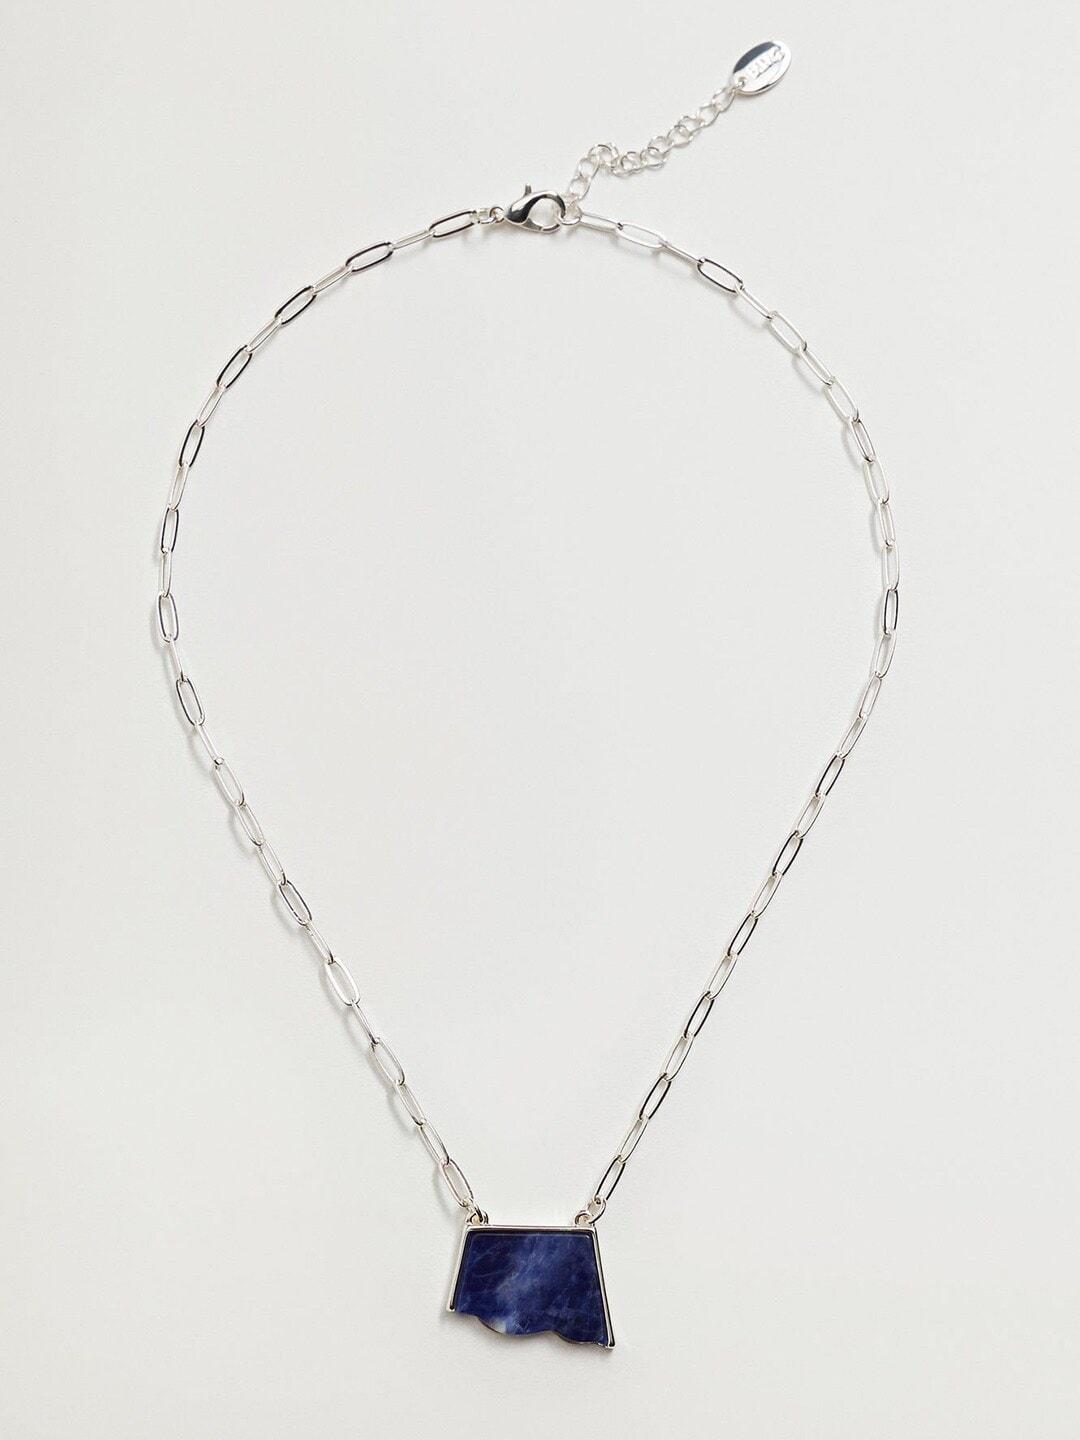 MANGO Silver-Toned & Navy Blue Asymmetric Stone Studded Chain Link Necklace